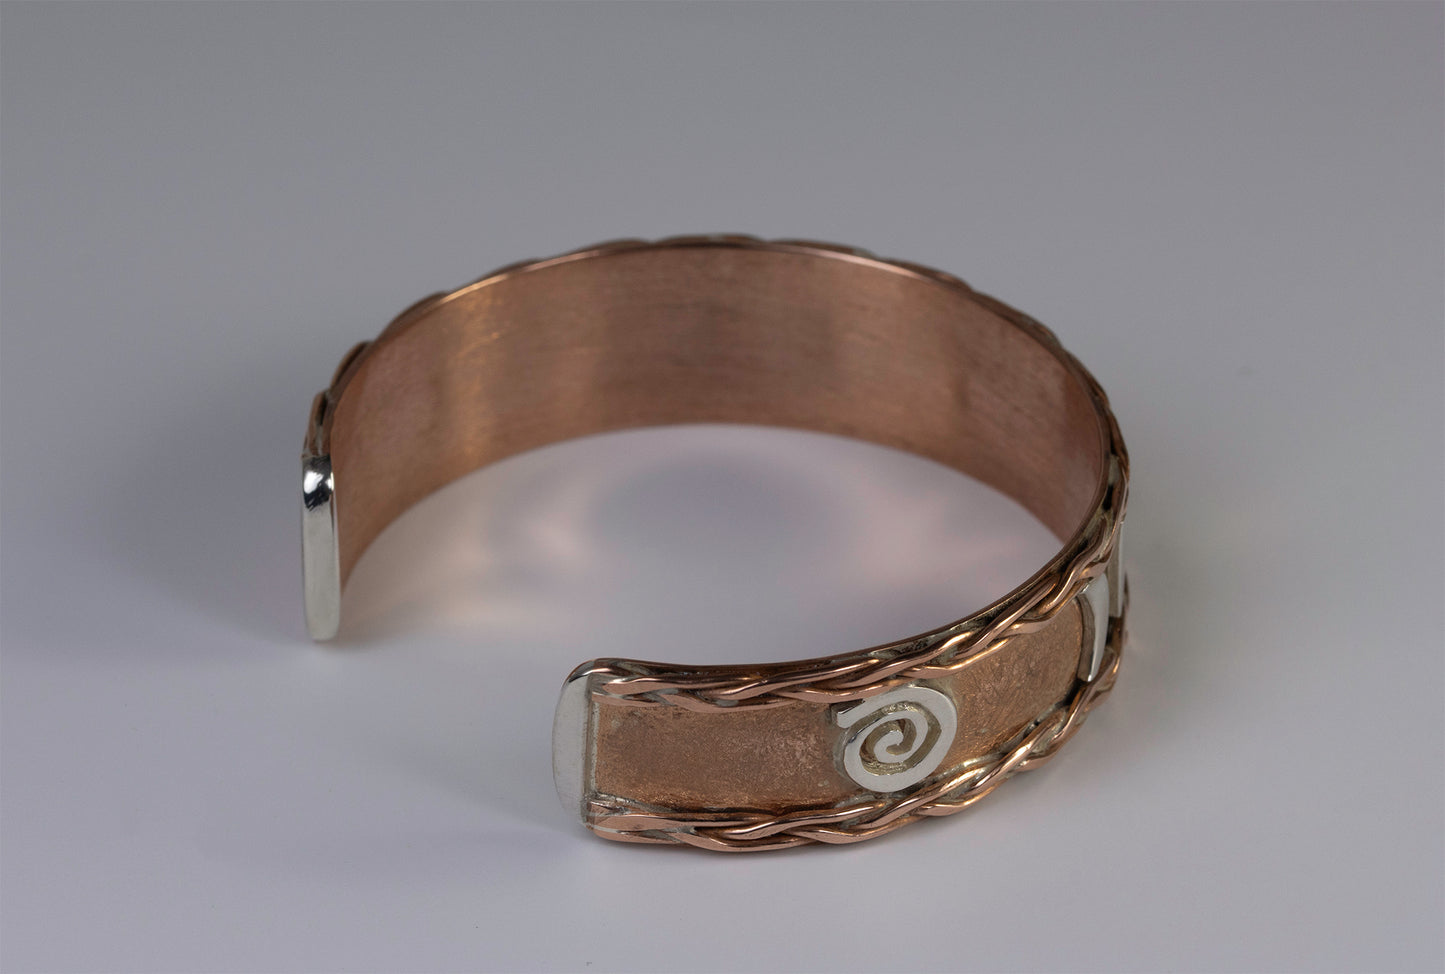 Phases of the Moon Bangle - copper & sterling silver